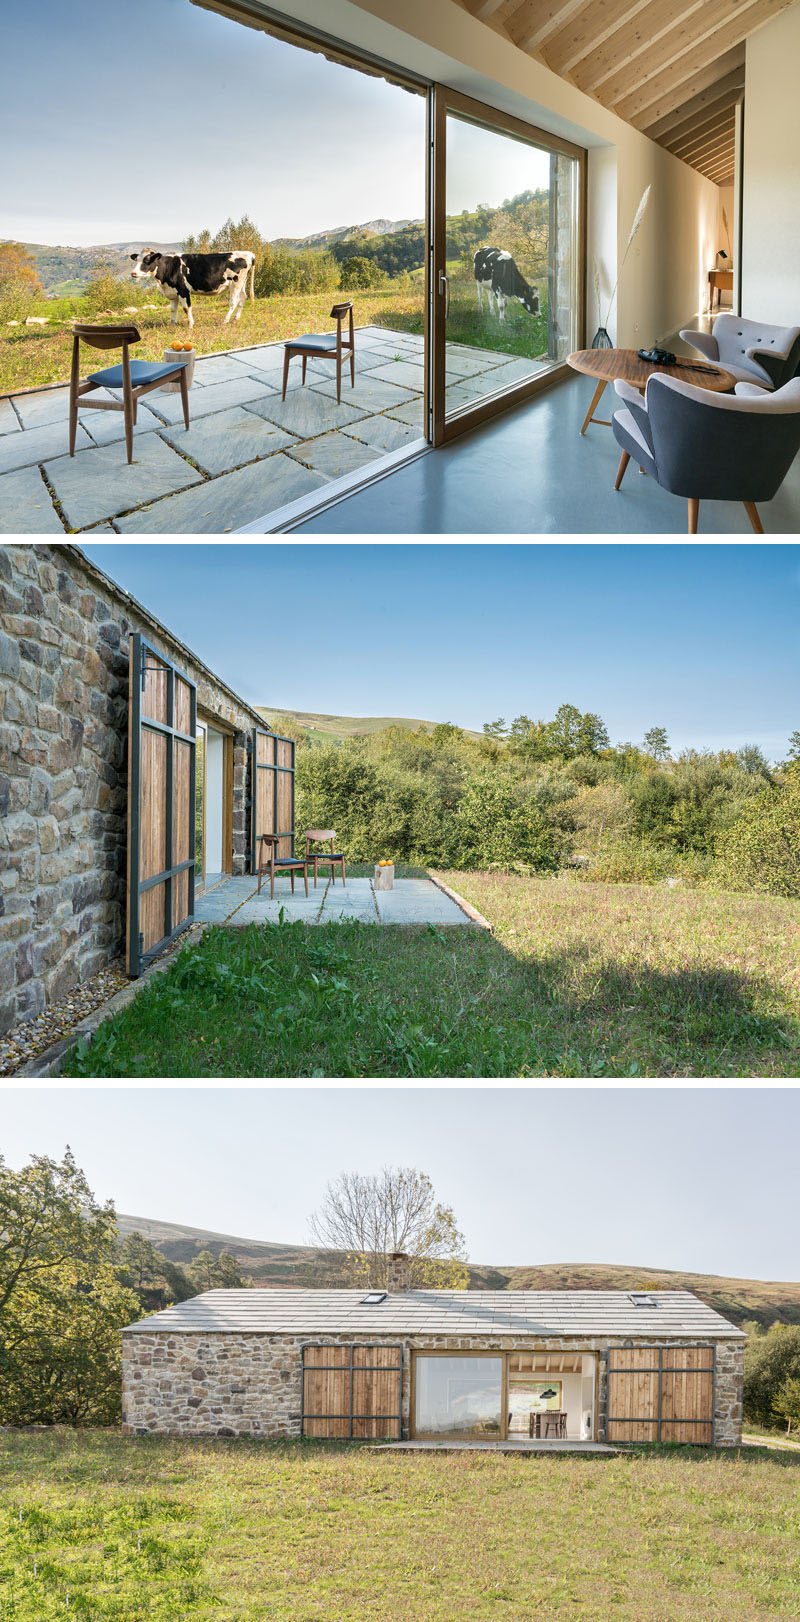 This contemporary stone cottage has a small patio with expansive views of the mountains and valleys in the distance. #StoneCottage #ContemporaryCottage